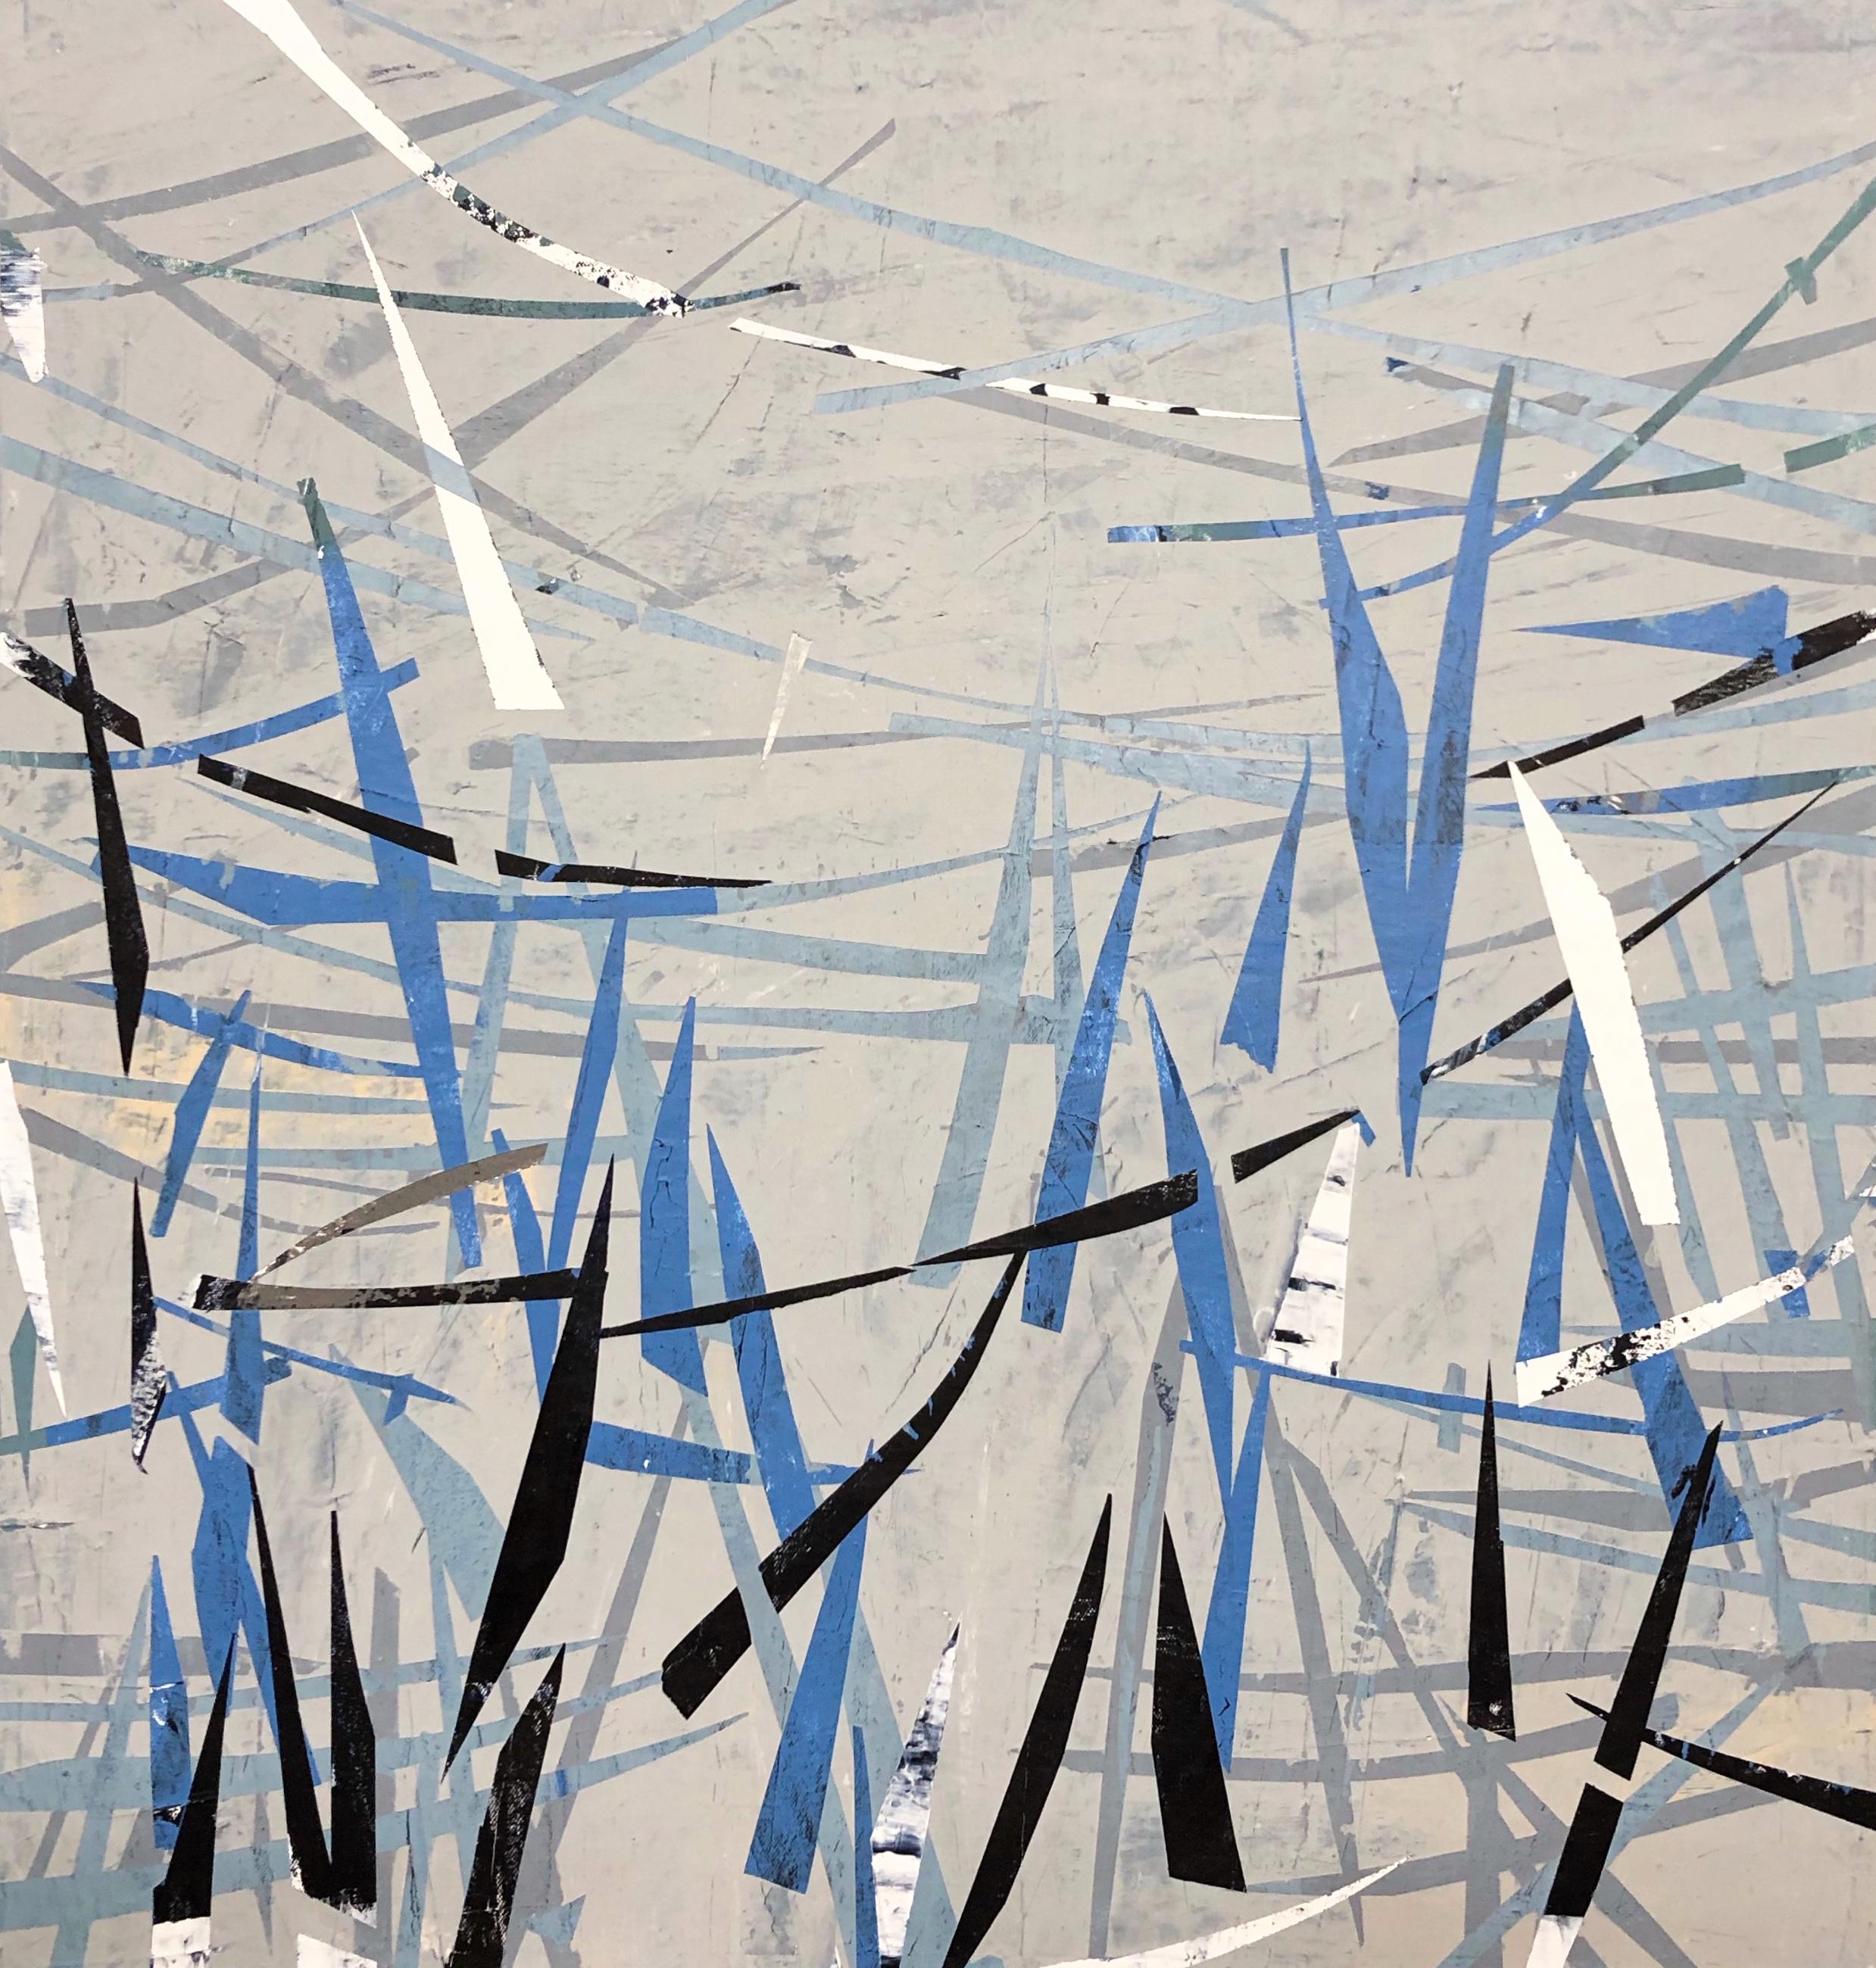 Shira Toren Landscape Painting - Calm After the Storm, neutral toned abstraction with blue gestural marks